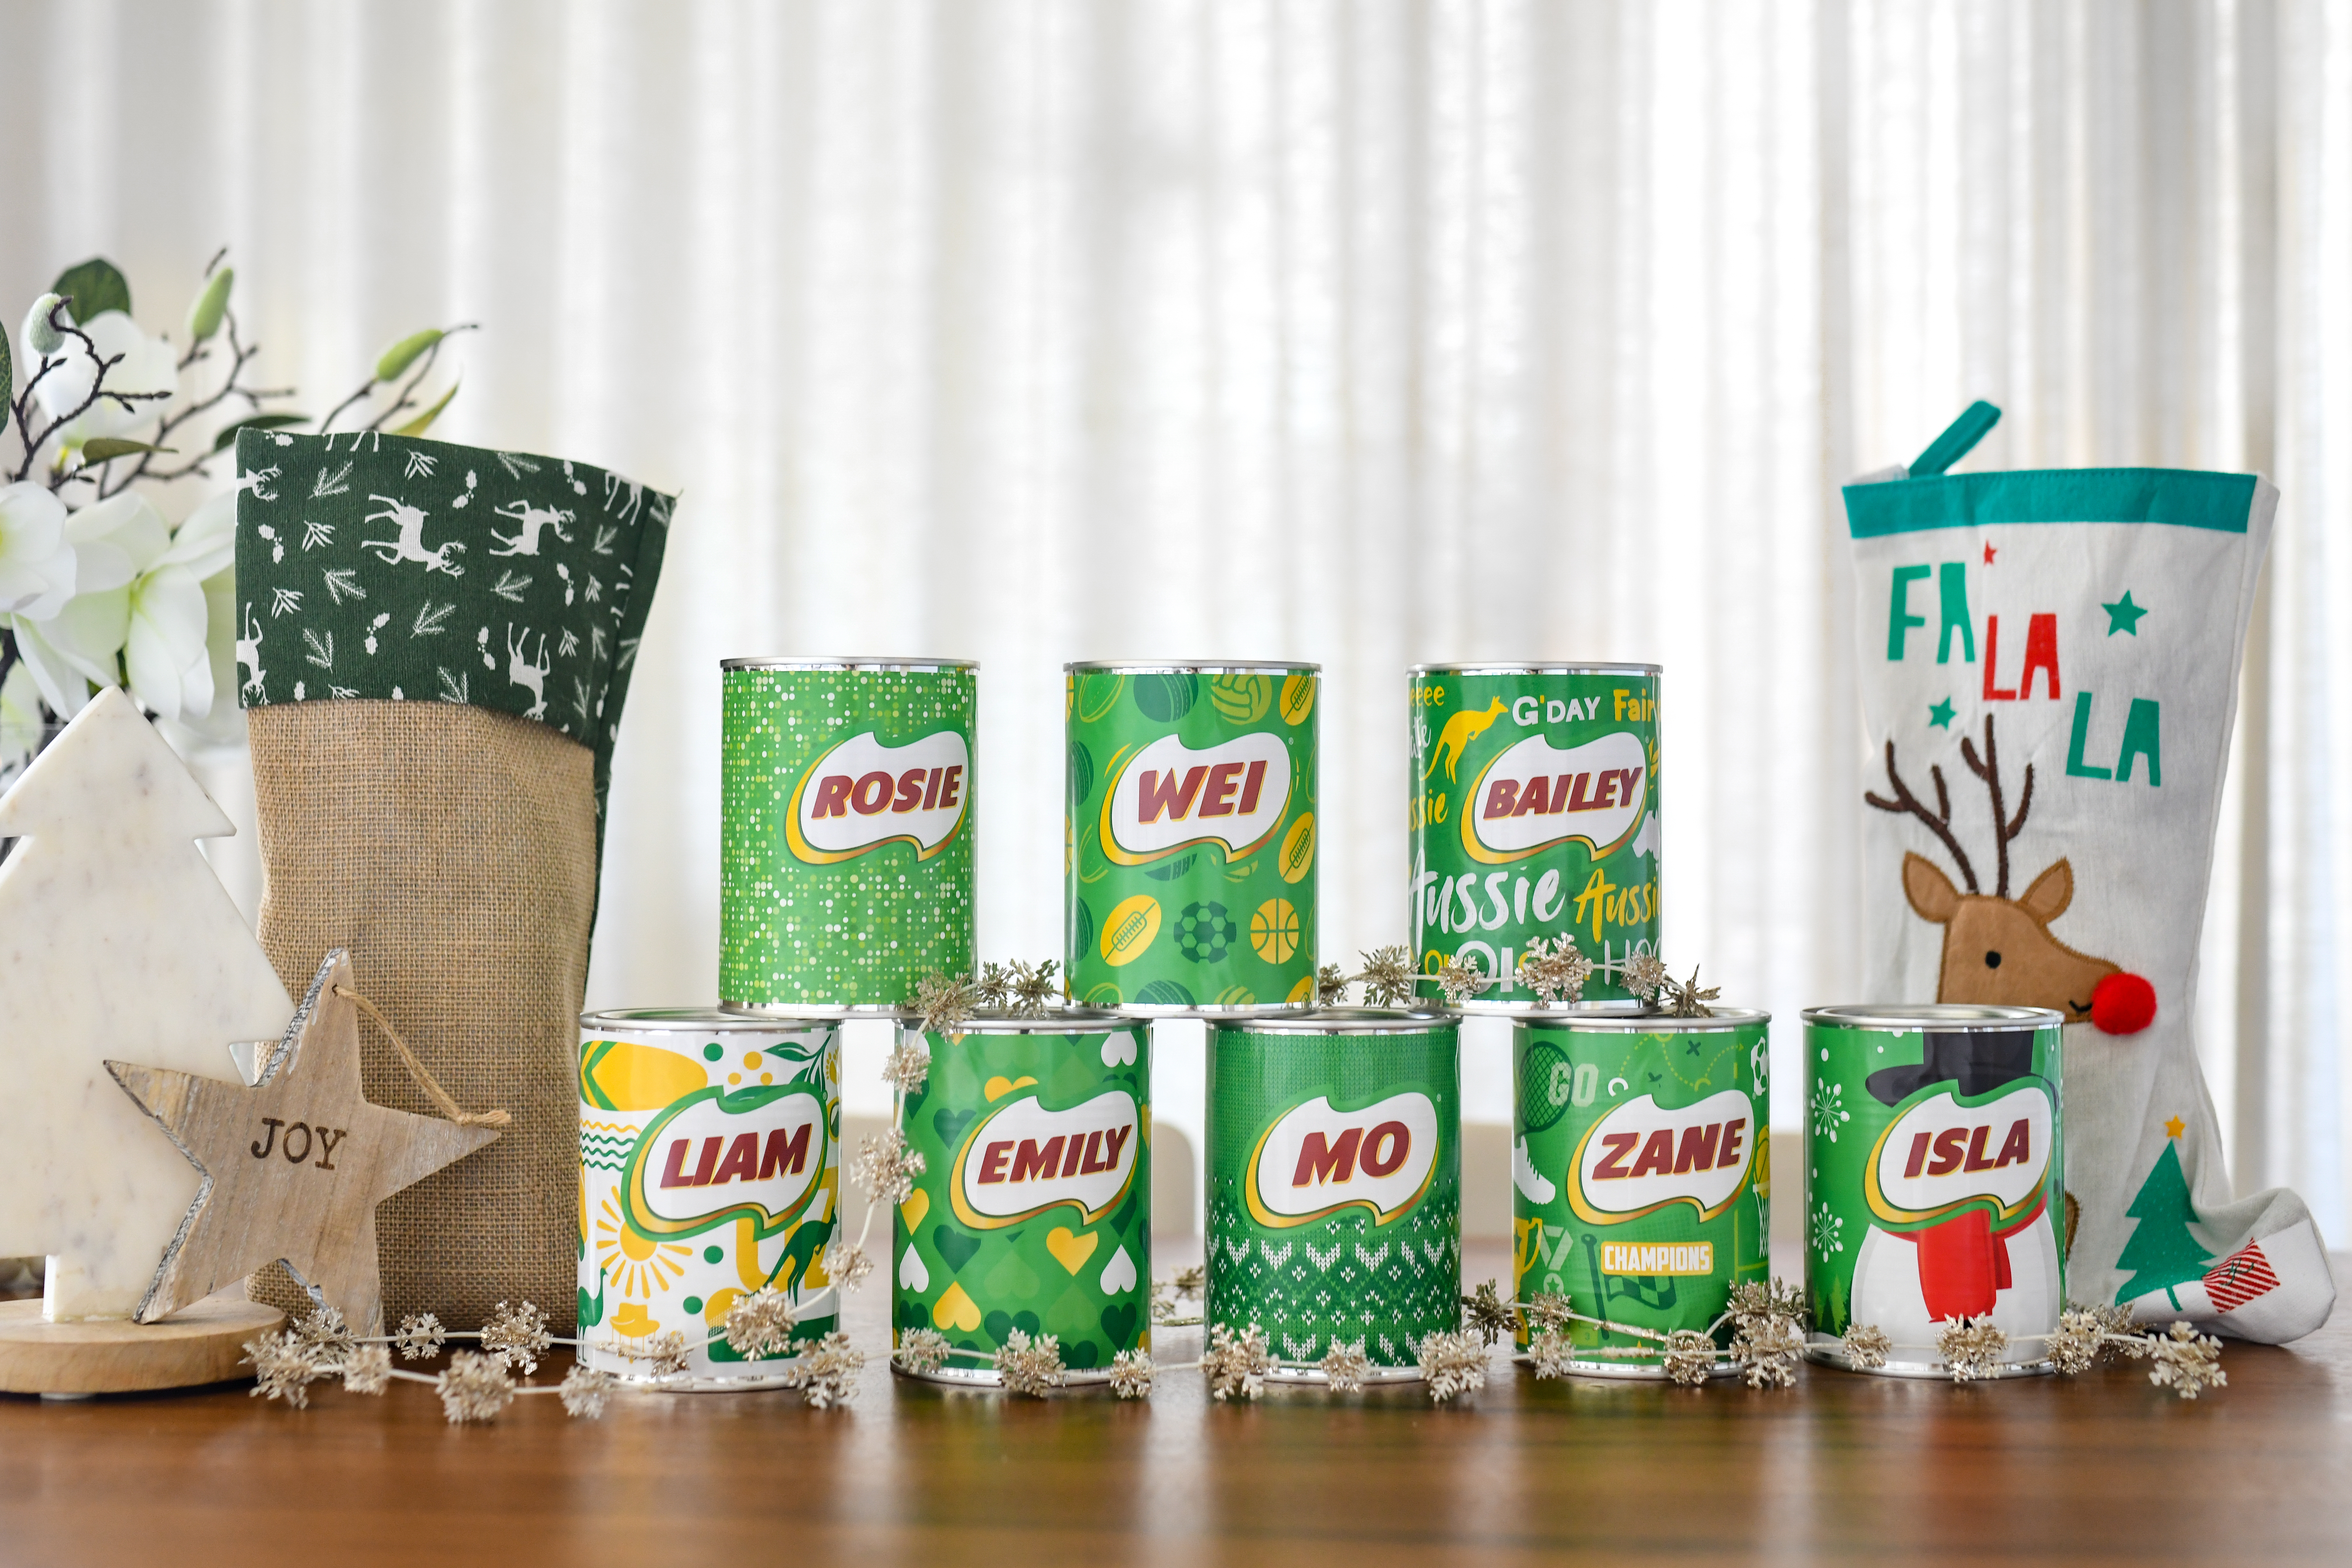 Milo’s Slinging Personalised Tins For Christmas, So There’s An Extremely Aussie Secret Santa